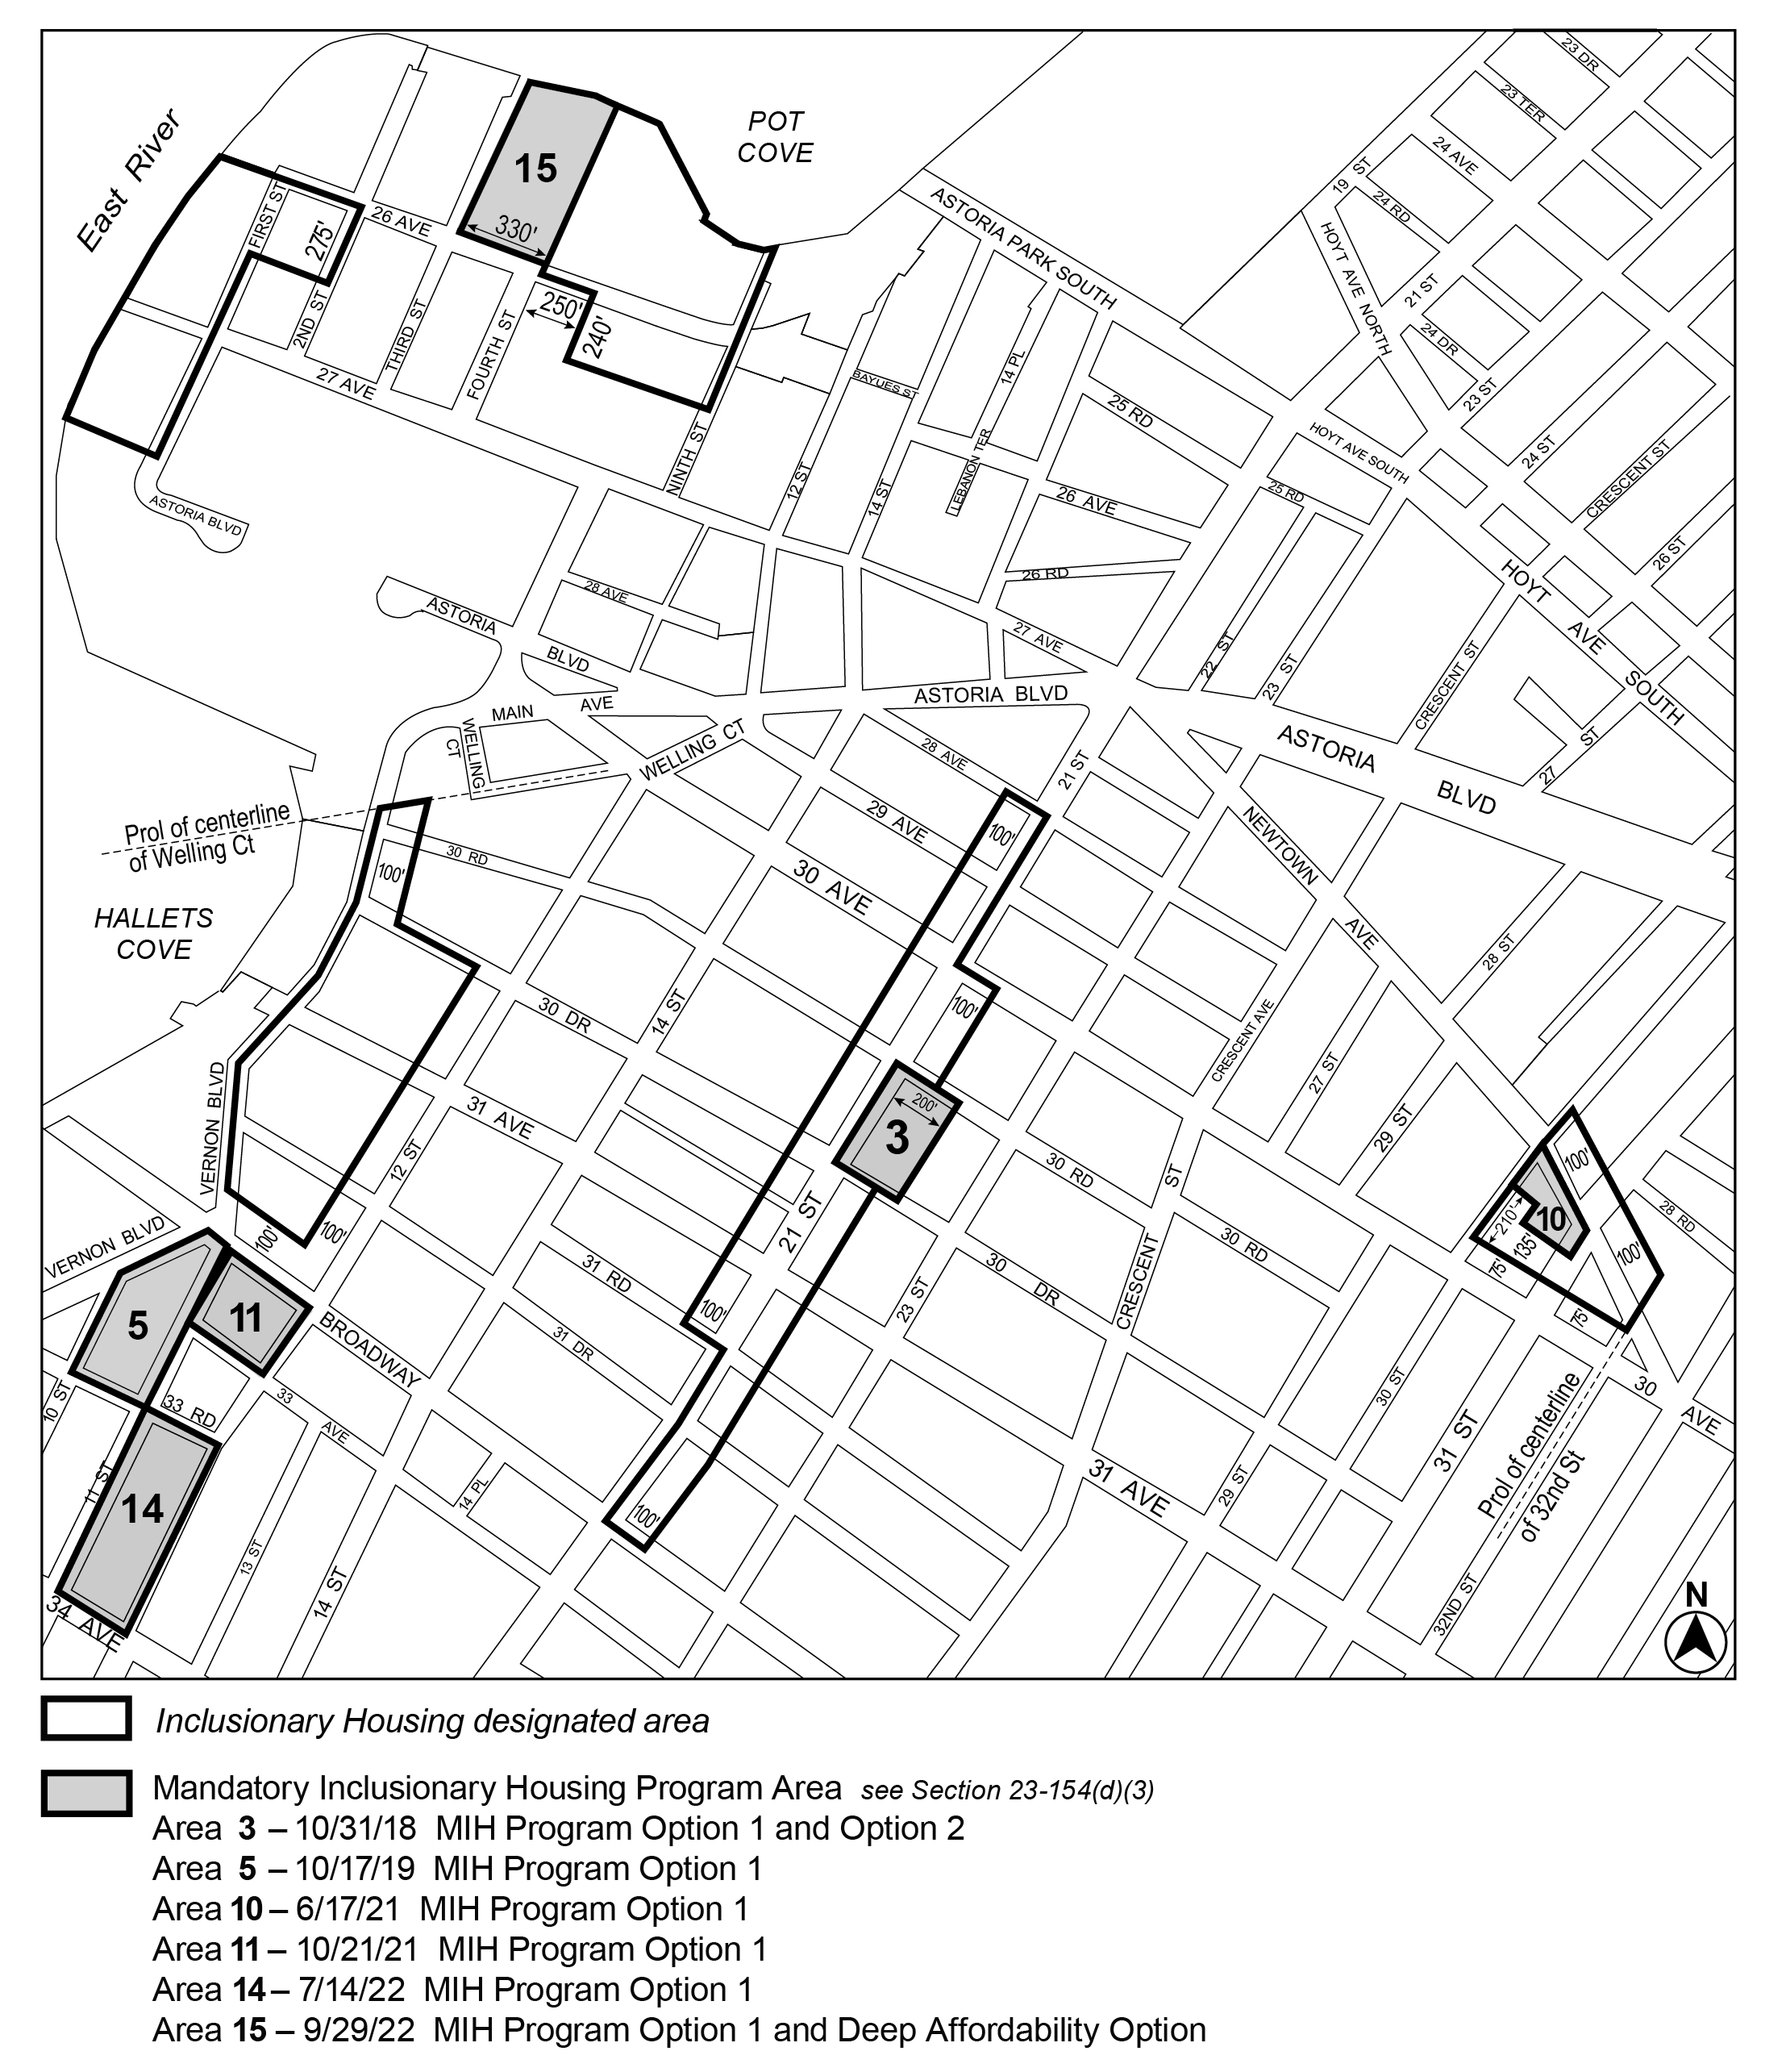 APPENDIX F, Queens CD 1, Map 1, Area 15 (Option 1 and Deep Affordability Option) adopted 29 Sept., 2022